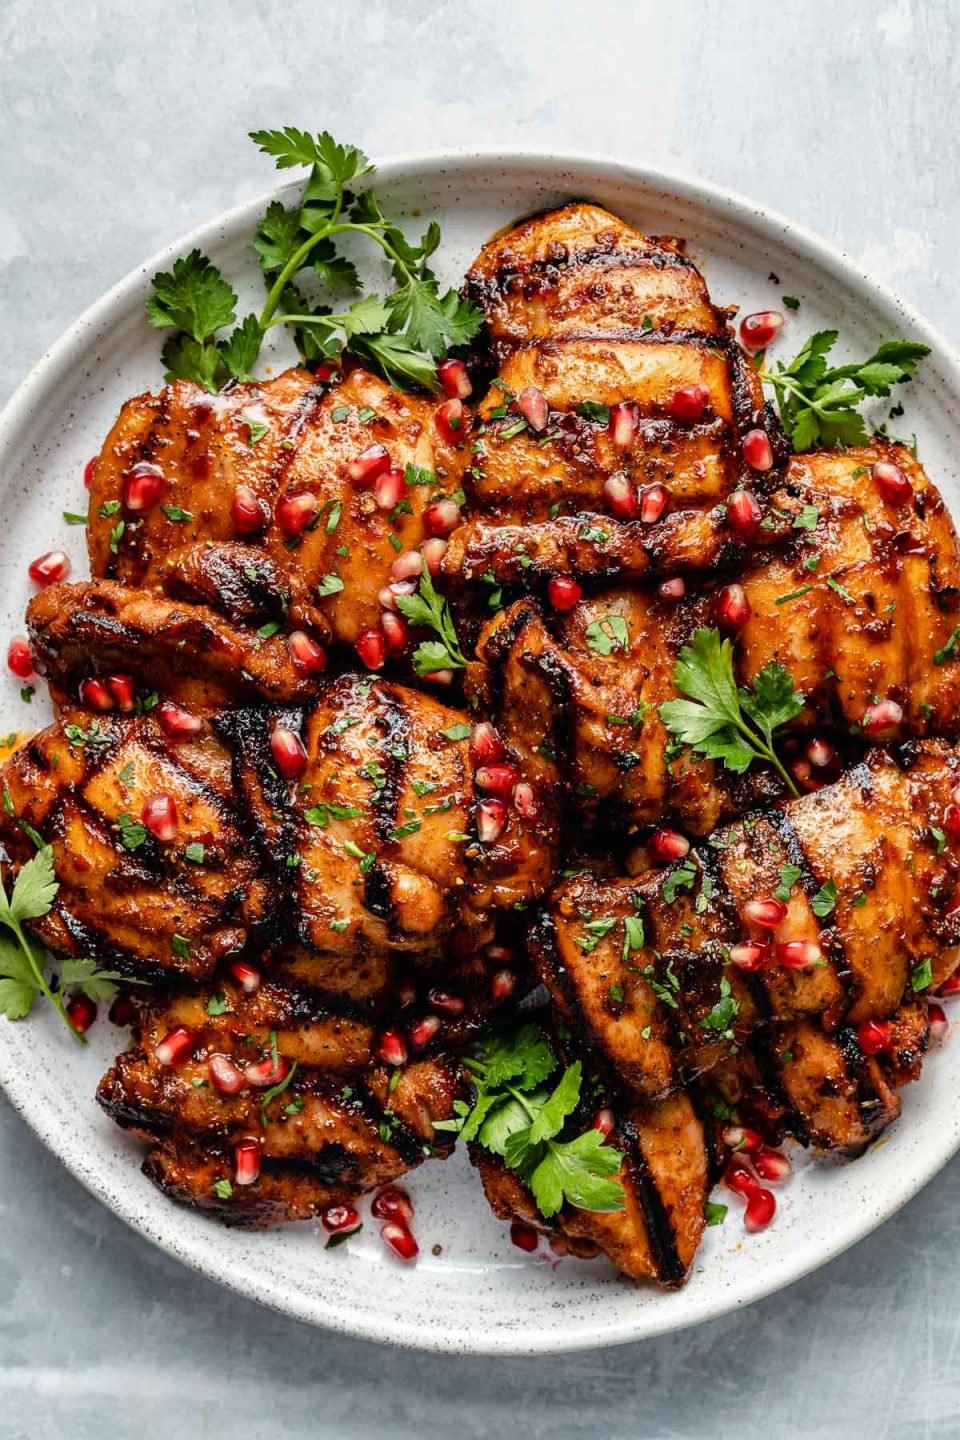 Grilled honey harissa marinated chicken thighs shown on a white speckled plate atop a light blue surface. The chicken is garnished with pomegranate arils & fresh cilantro leaves.